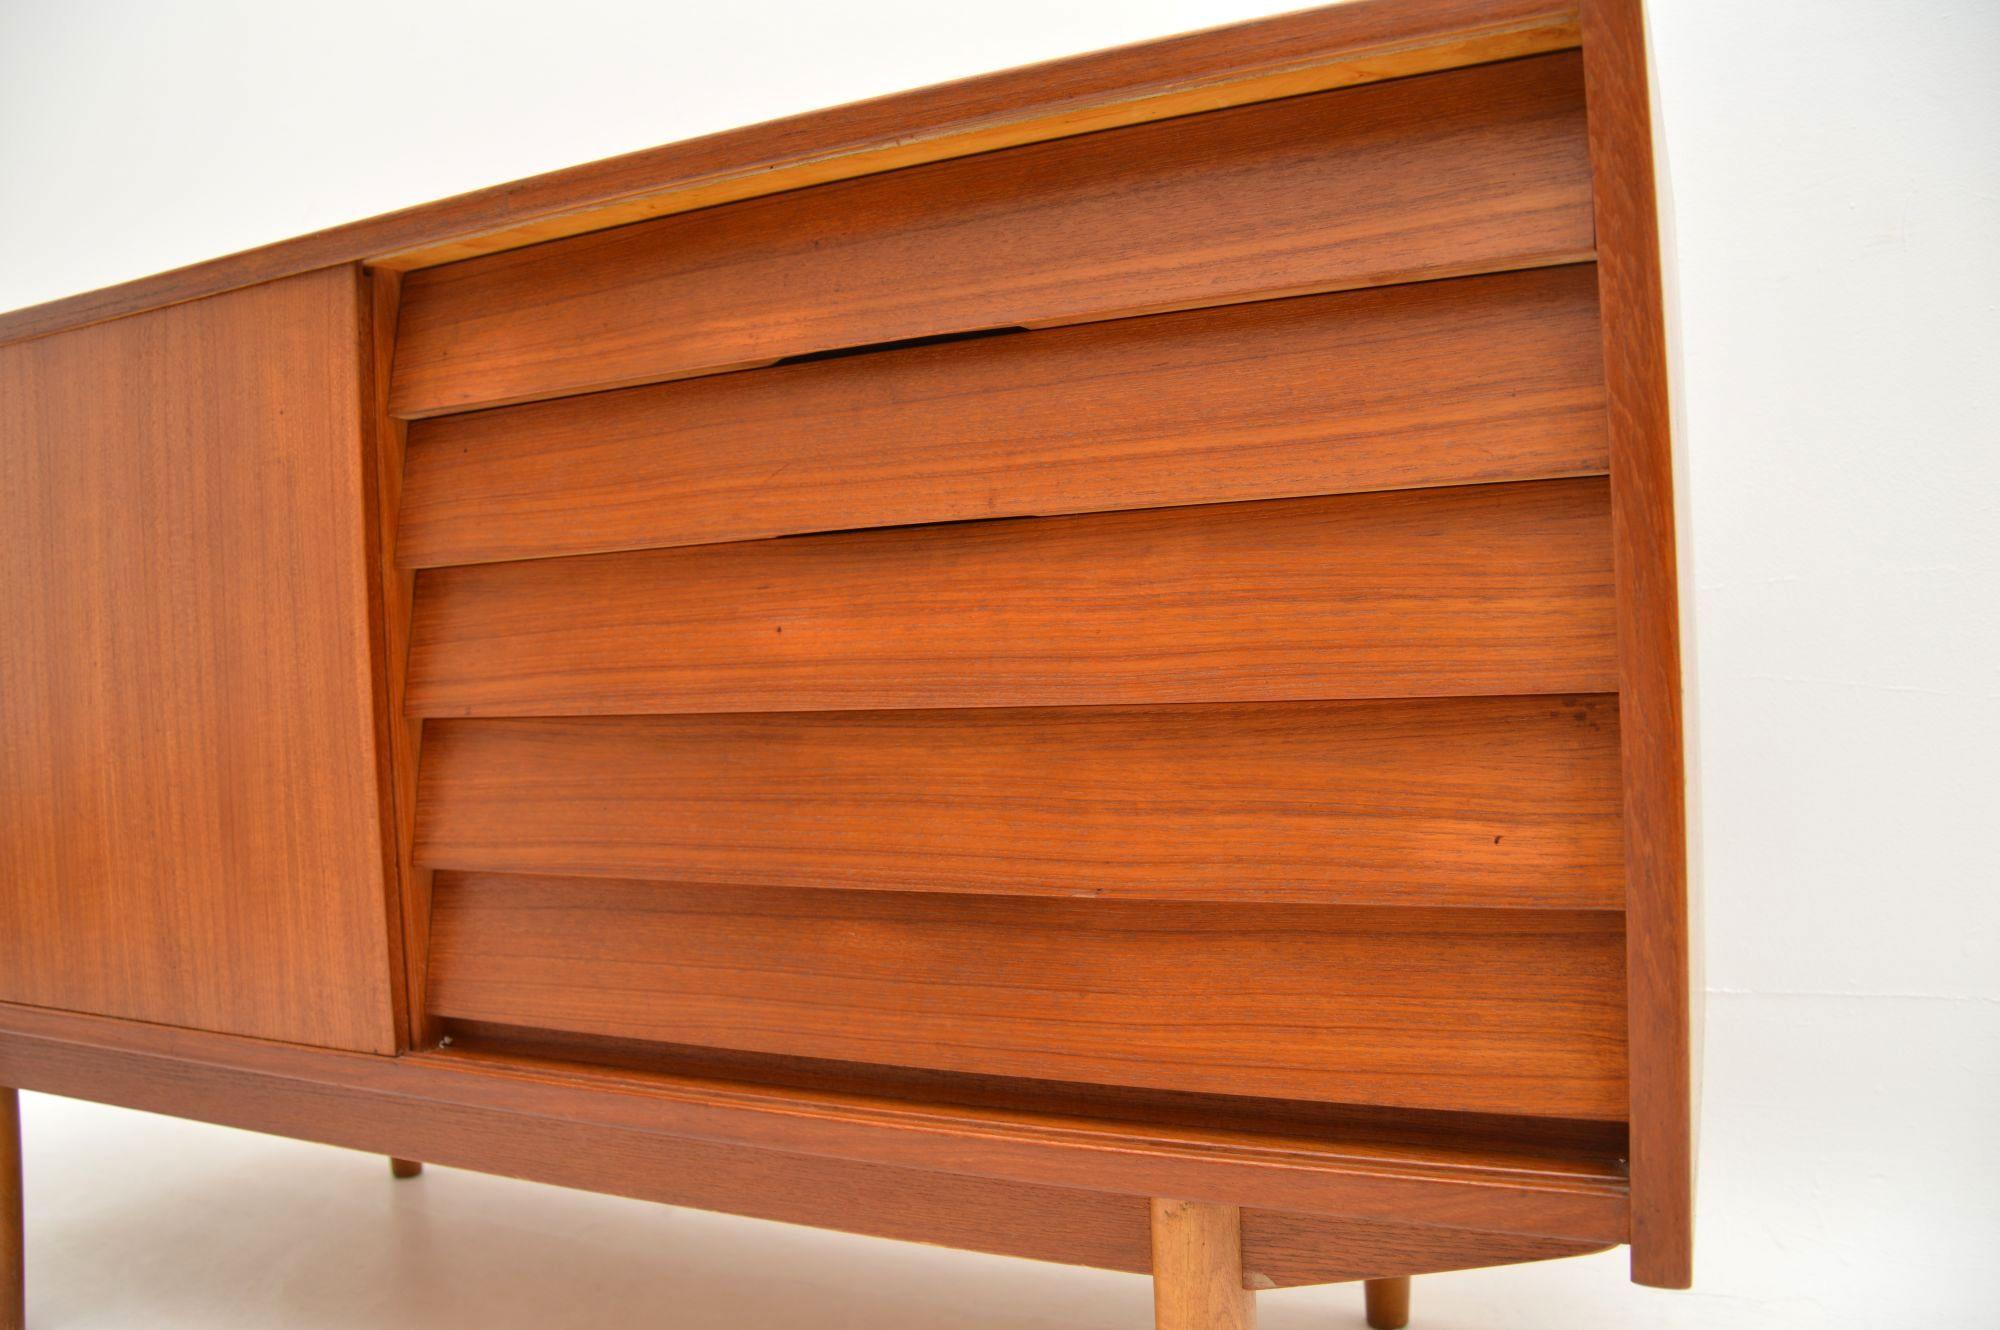 Sycamore 1960s Swedish Teak Sideboard by Nils Jonsson for Troeds